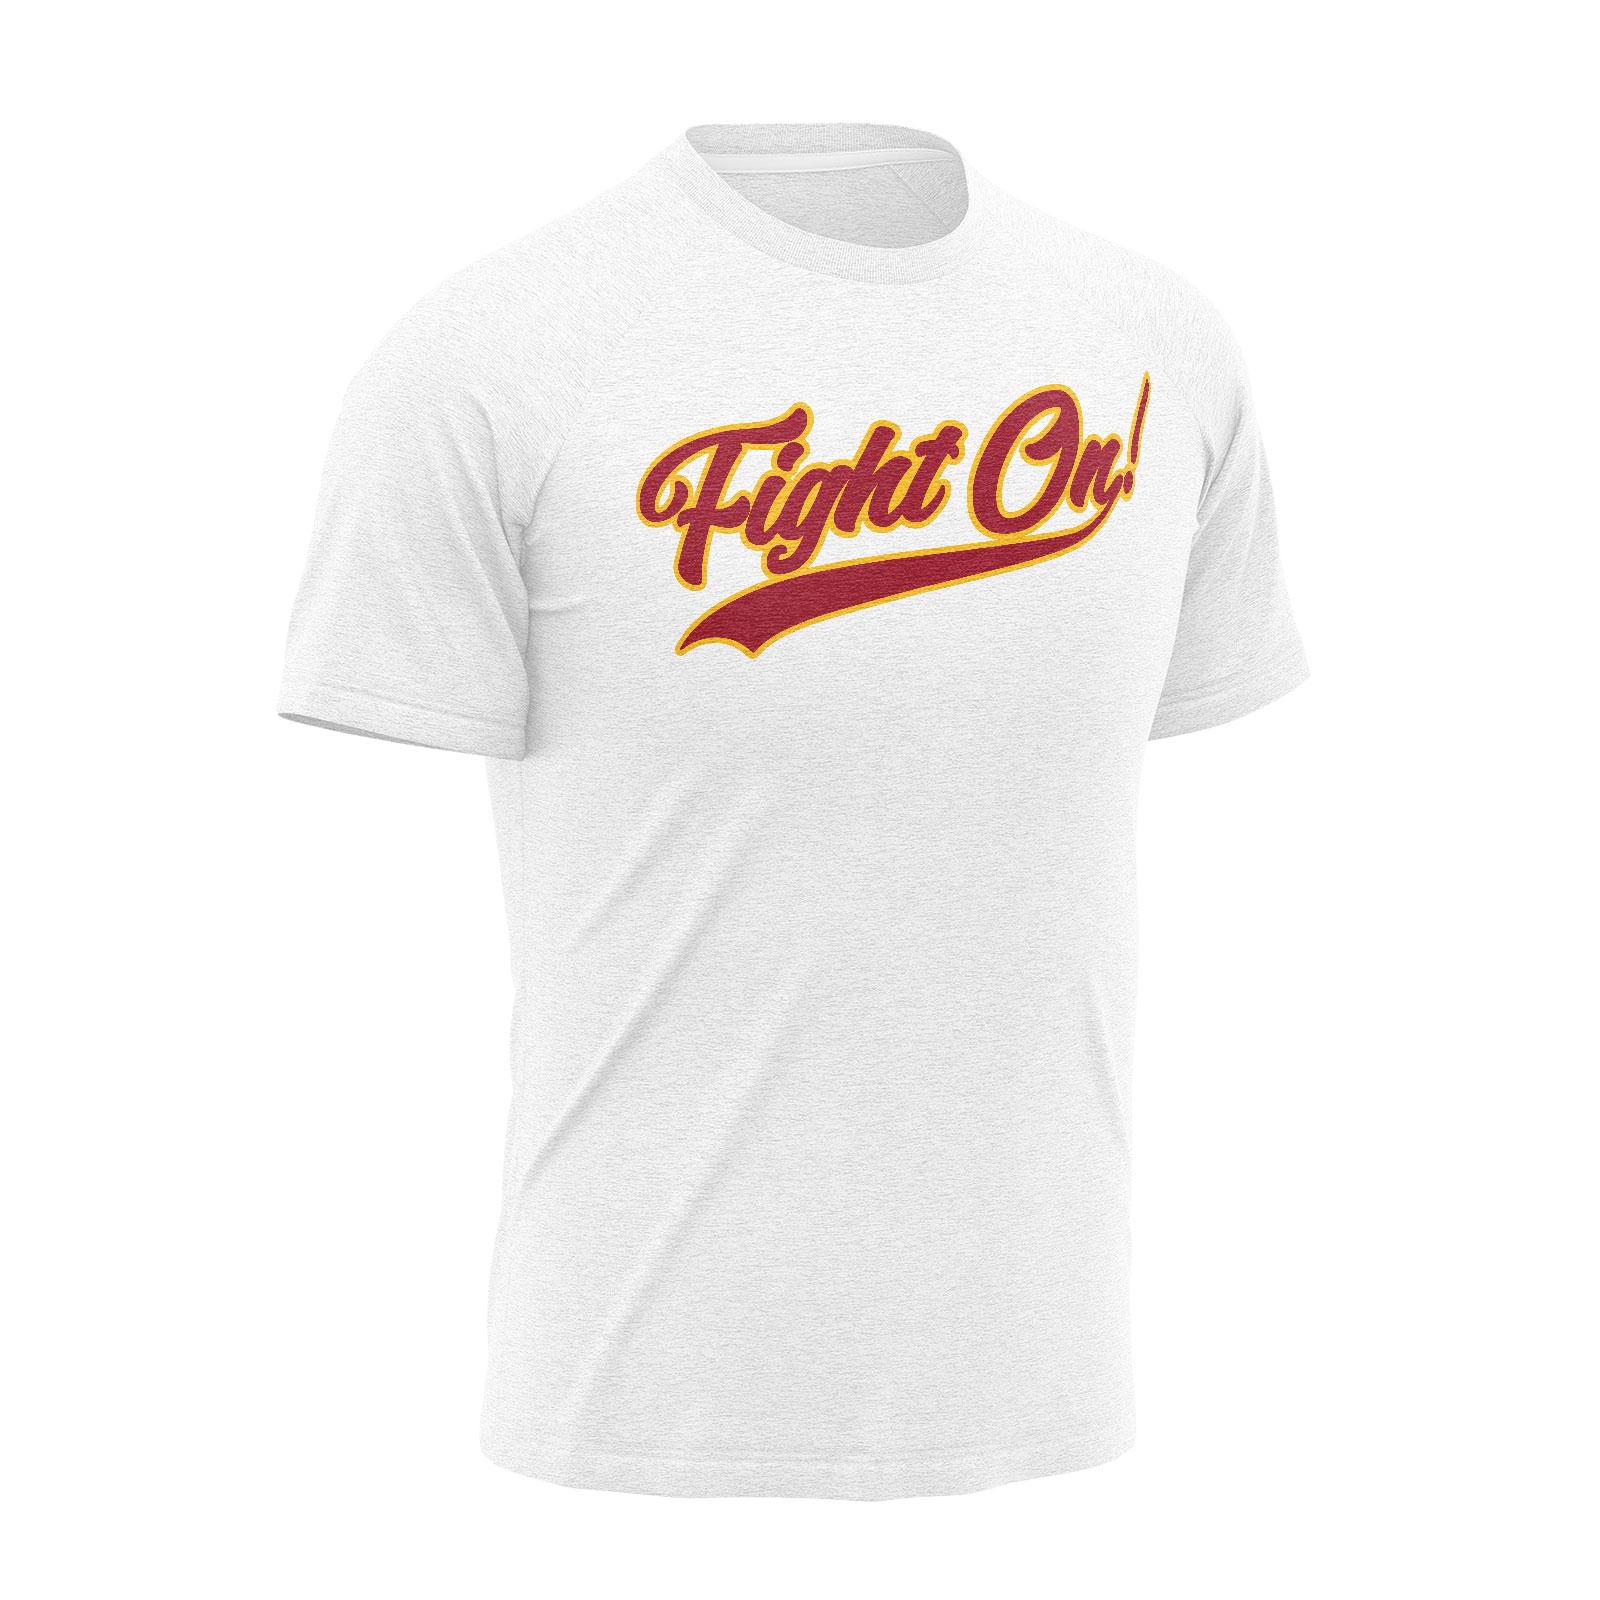 Fight On Swoosh Tail SS Tee White image01